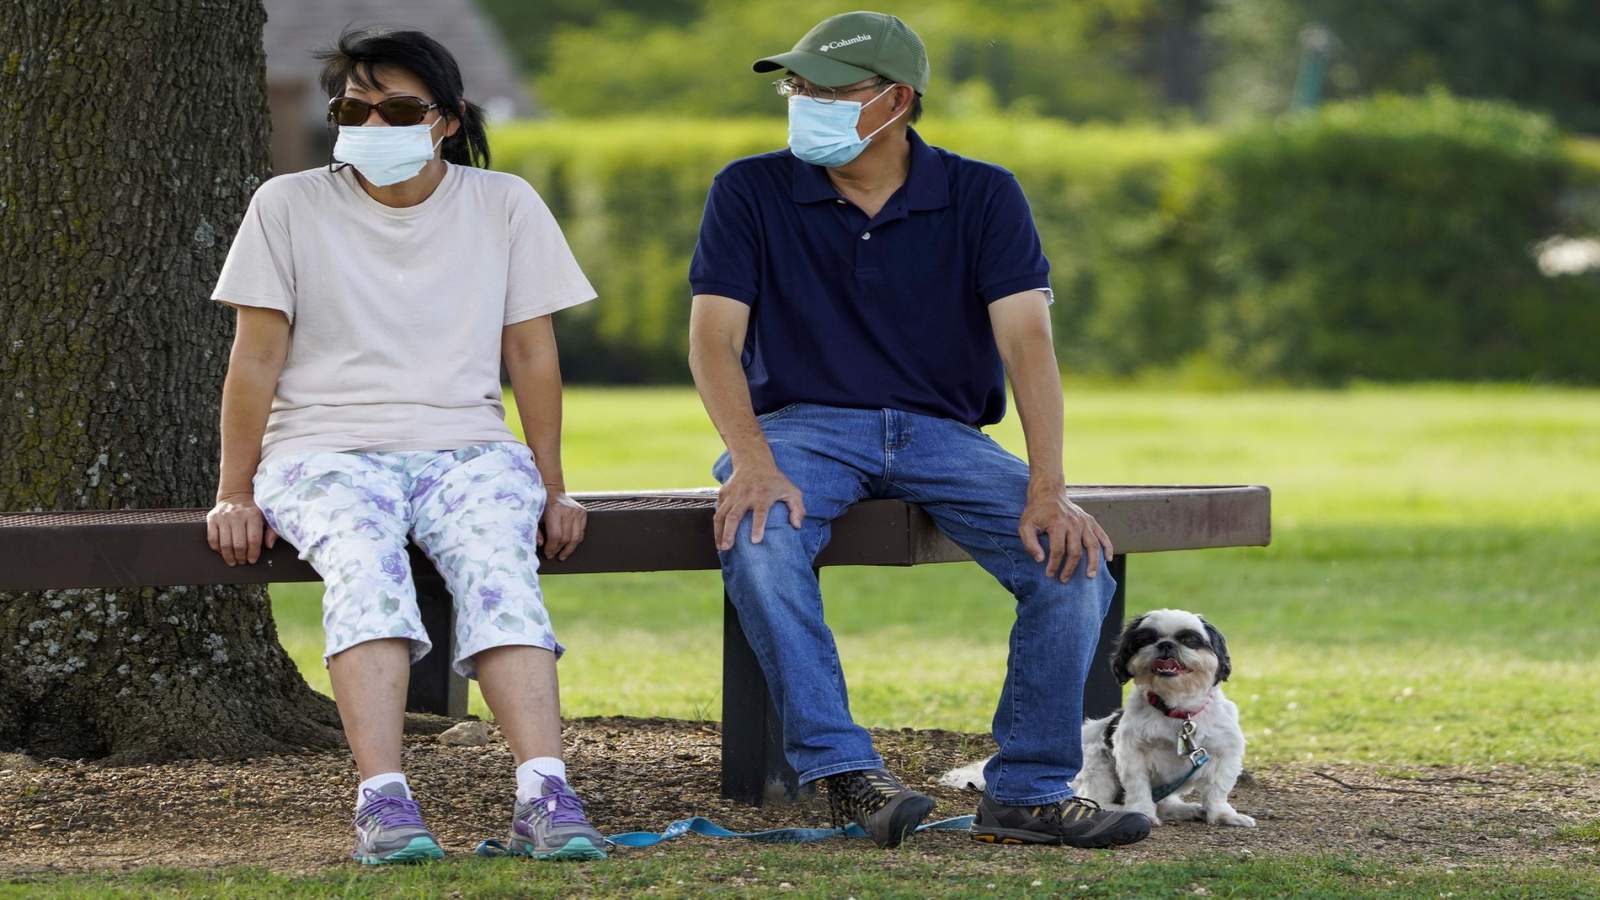 Statewide mask order could help slow the spread of coronavirus, local expert says